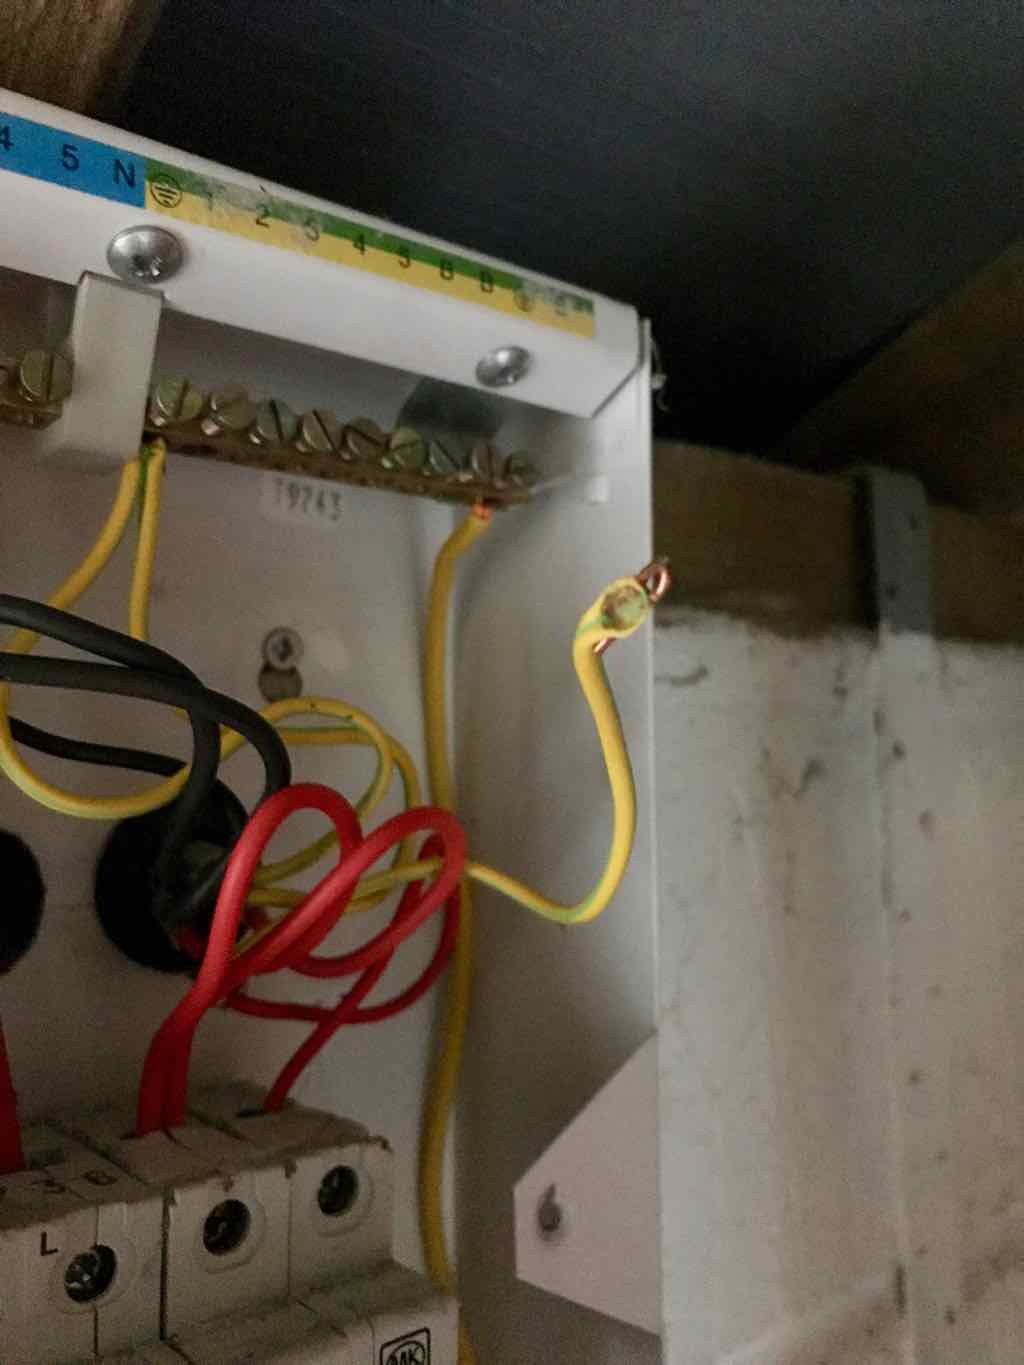 Earth cable tightened through sleeving